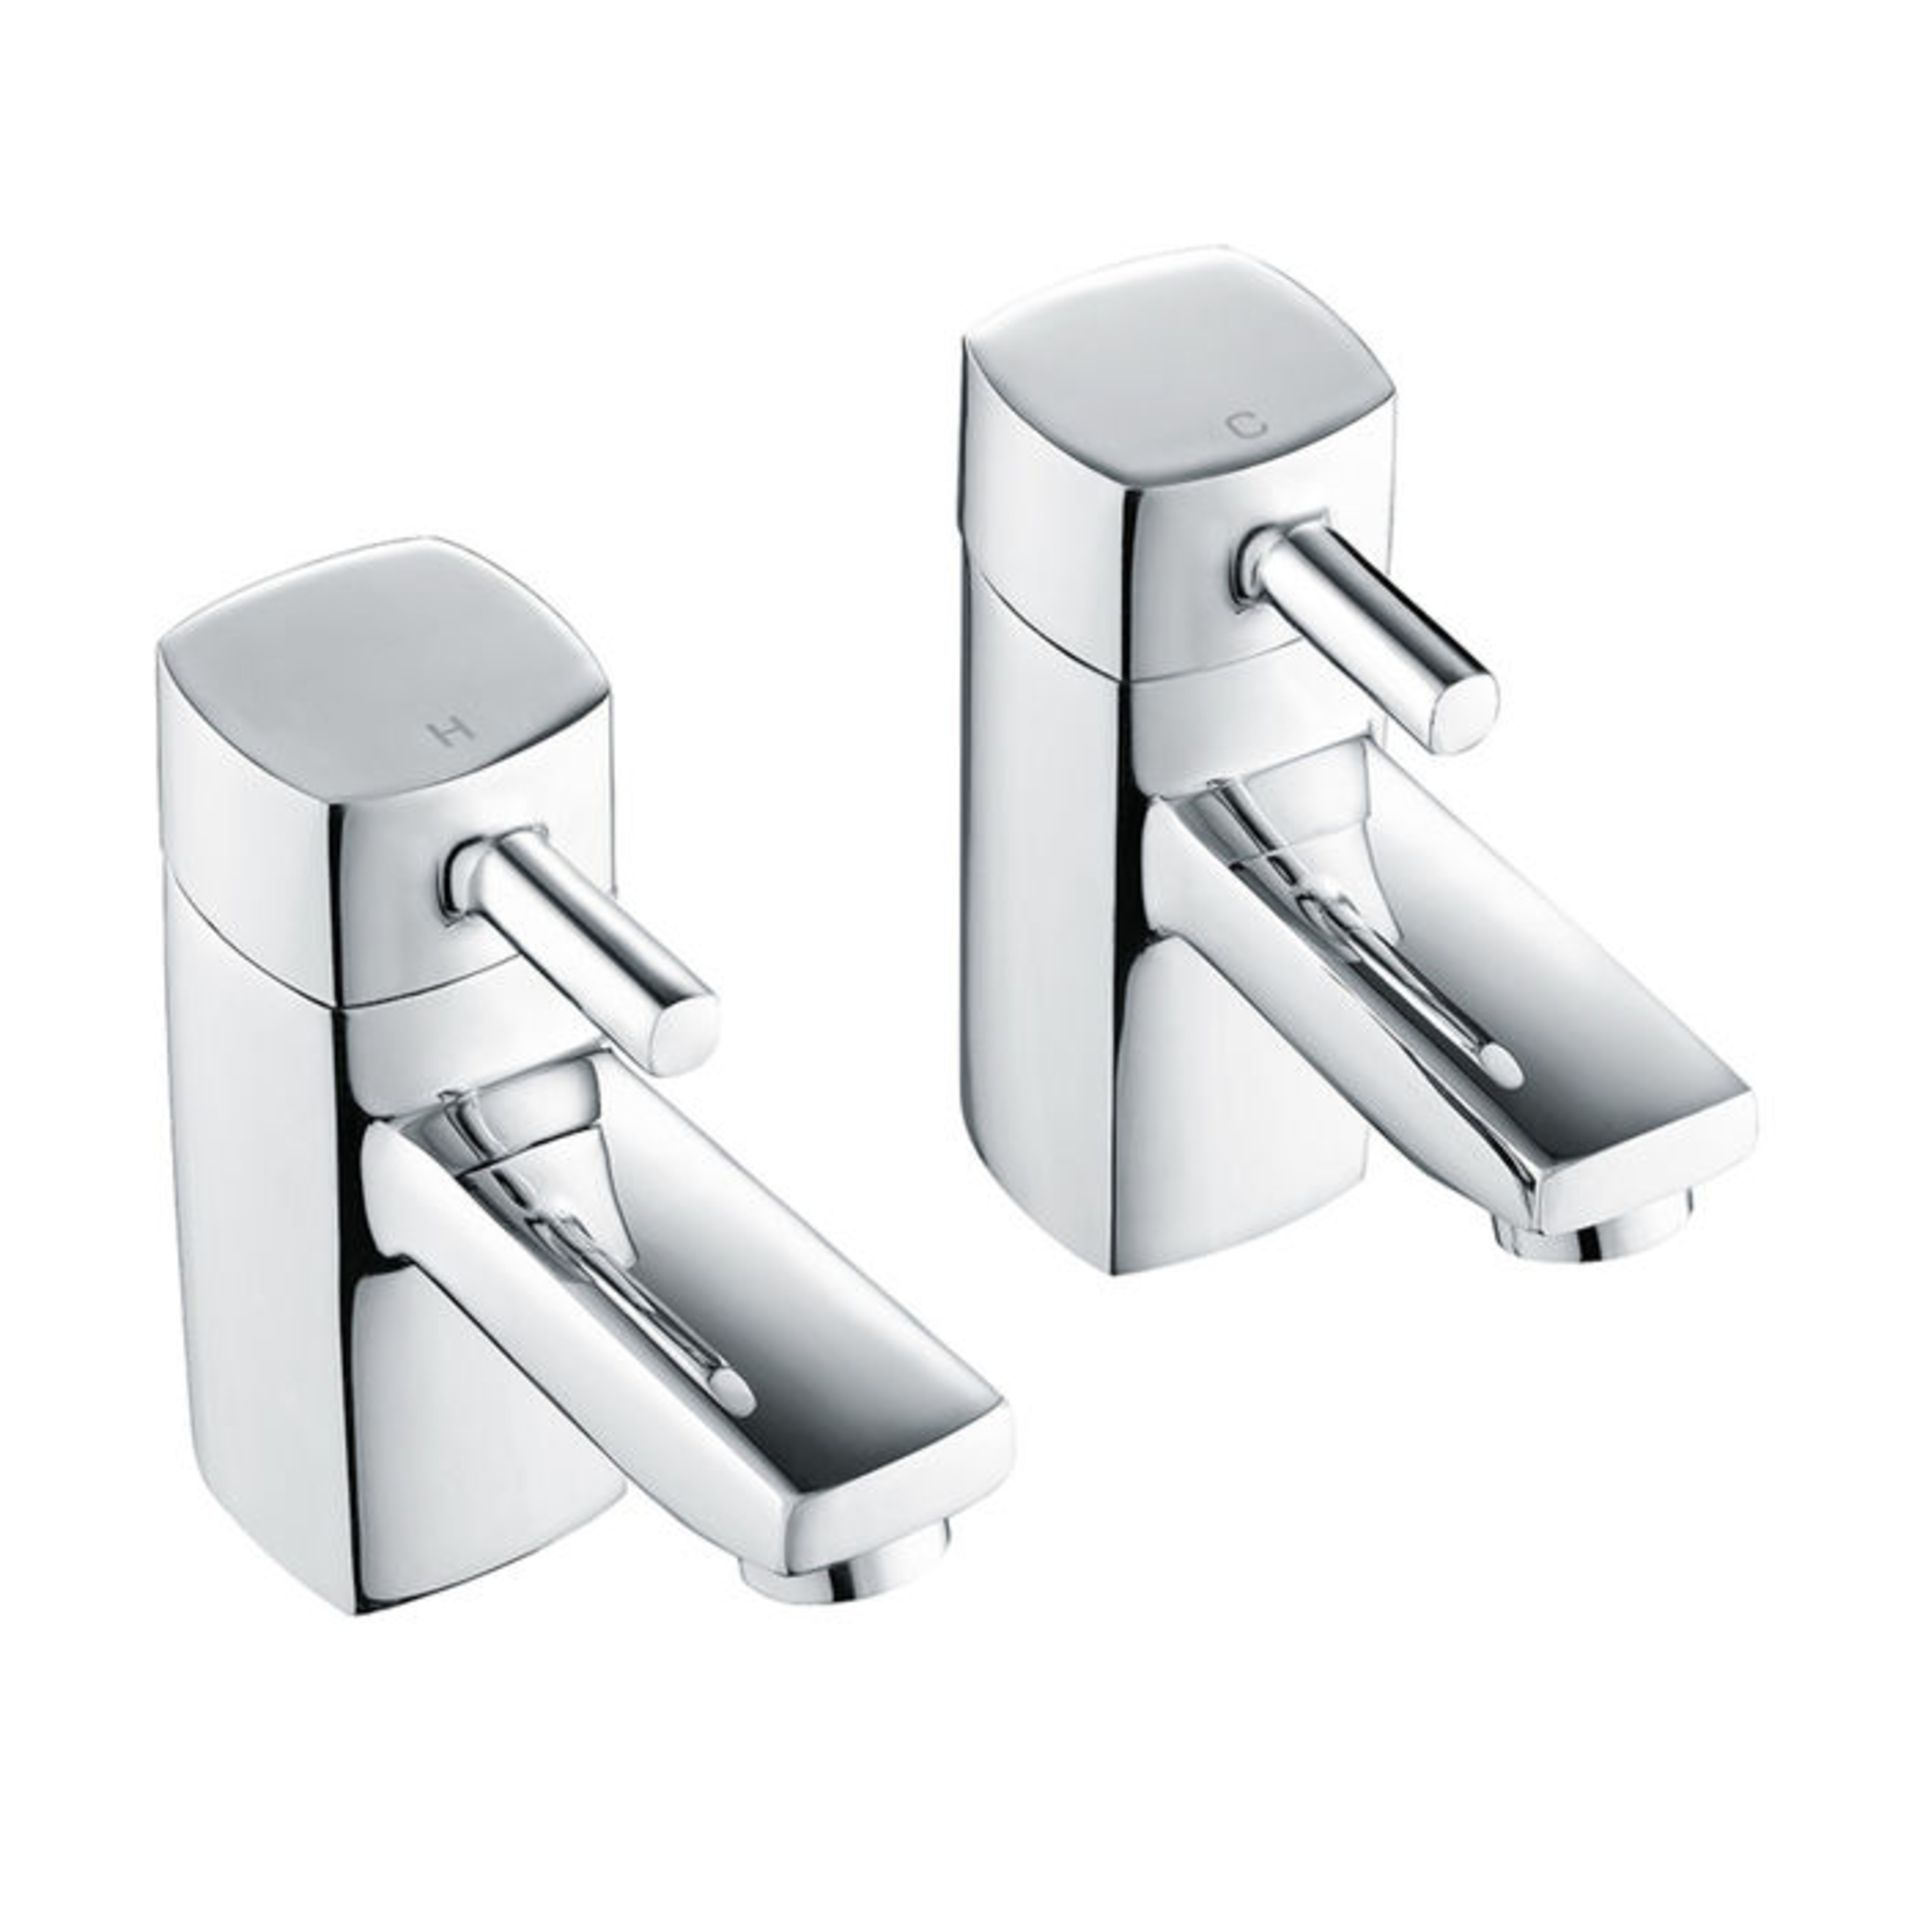 (M1090) Avon Hot & Cold Bath Taps. Chrome Plated Solid Brass 1/4 turn ceramic disc technology... - Image 2 of 2